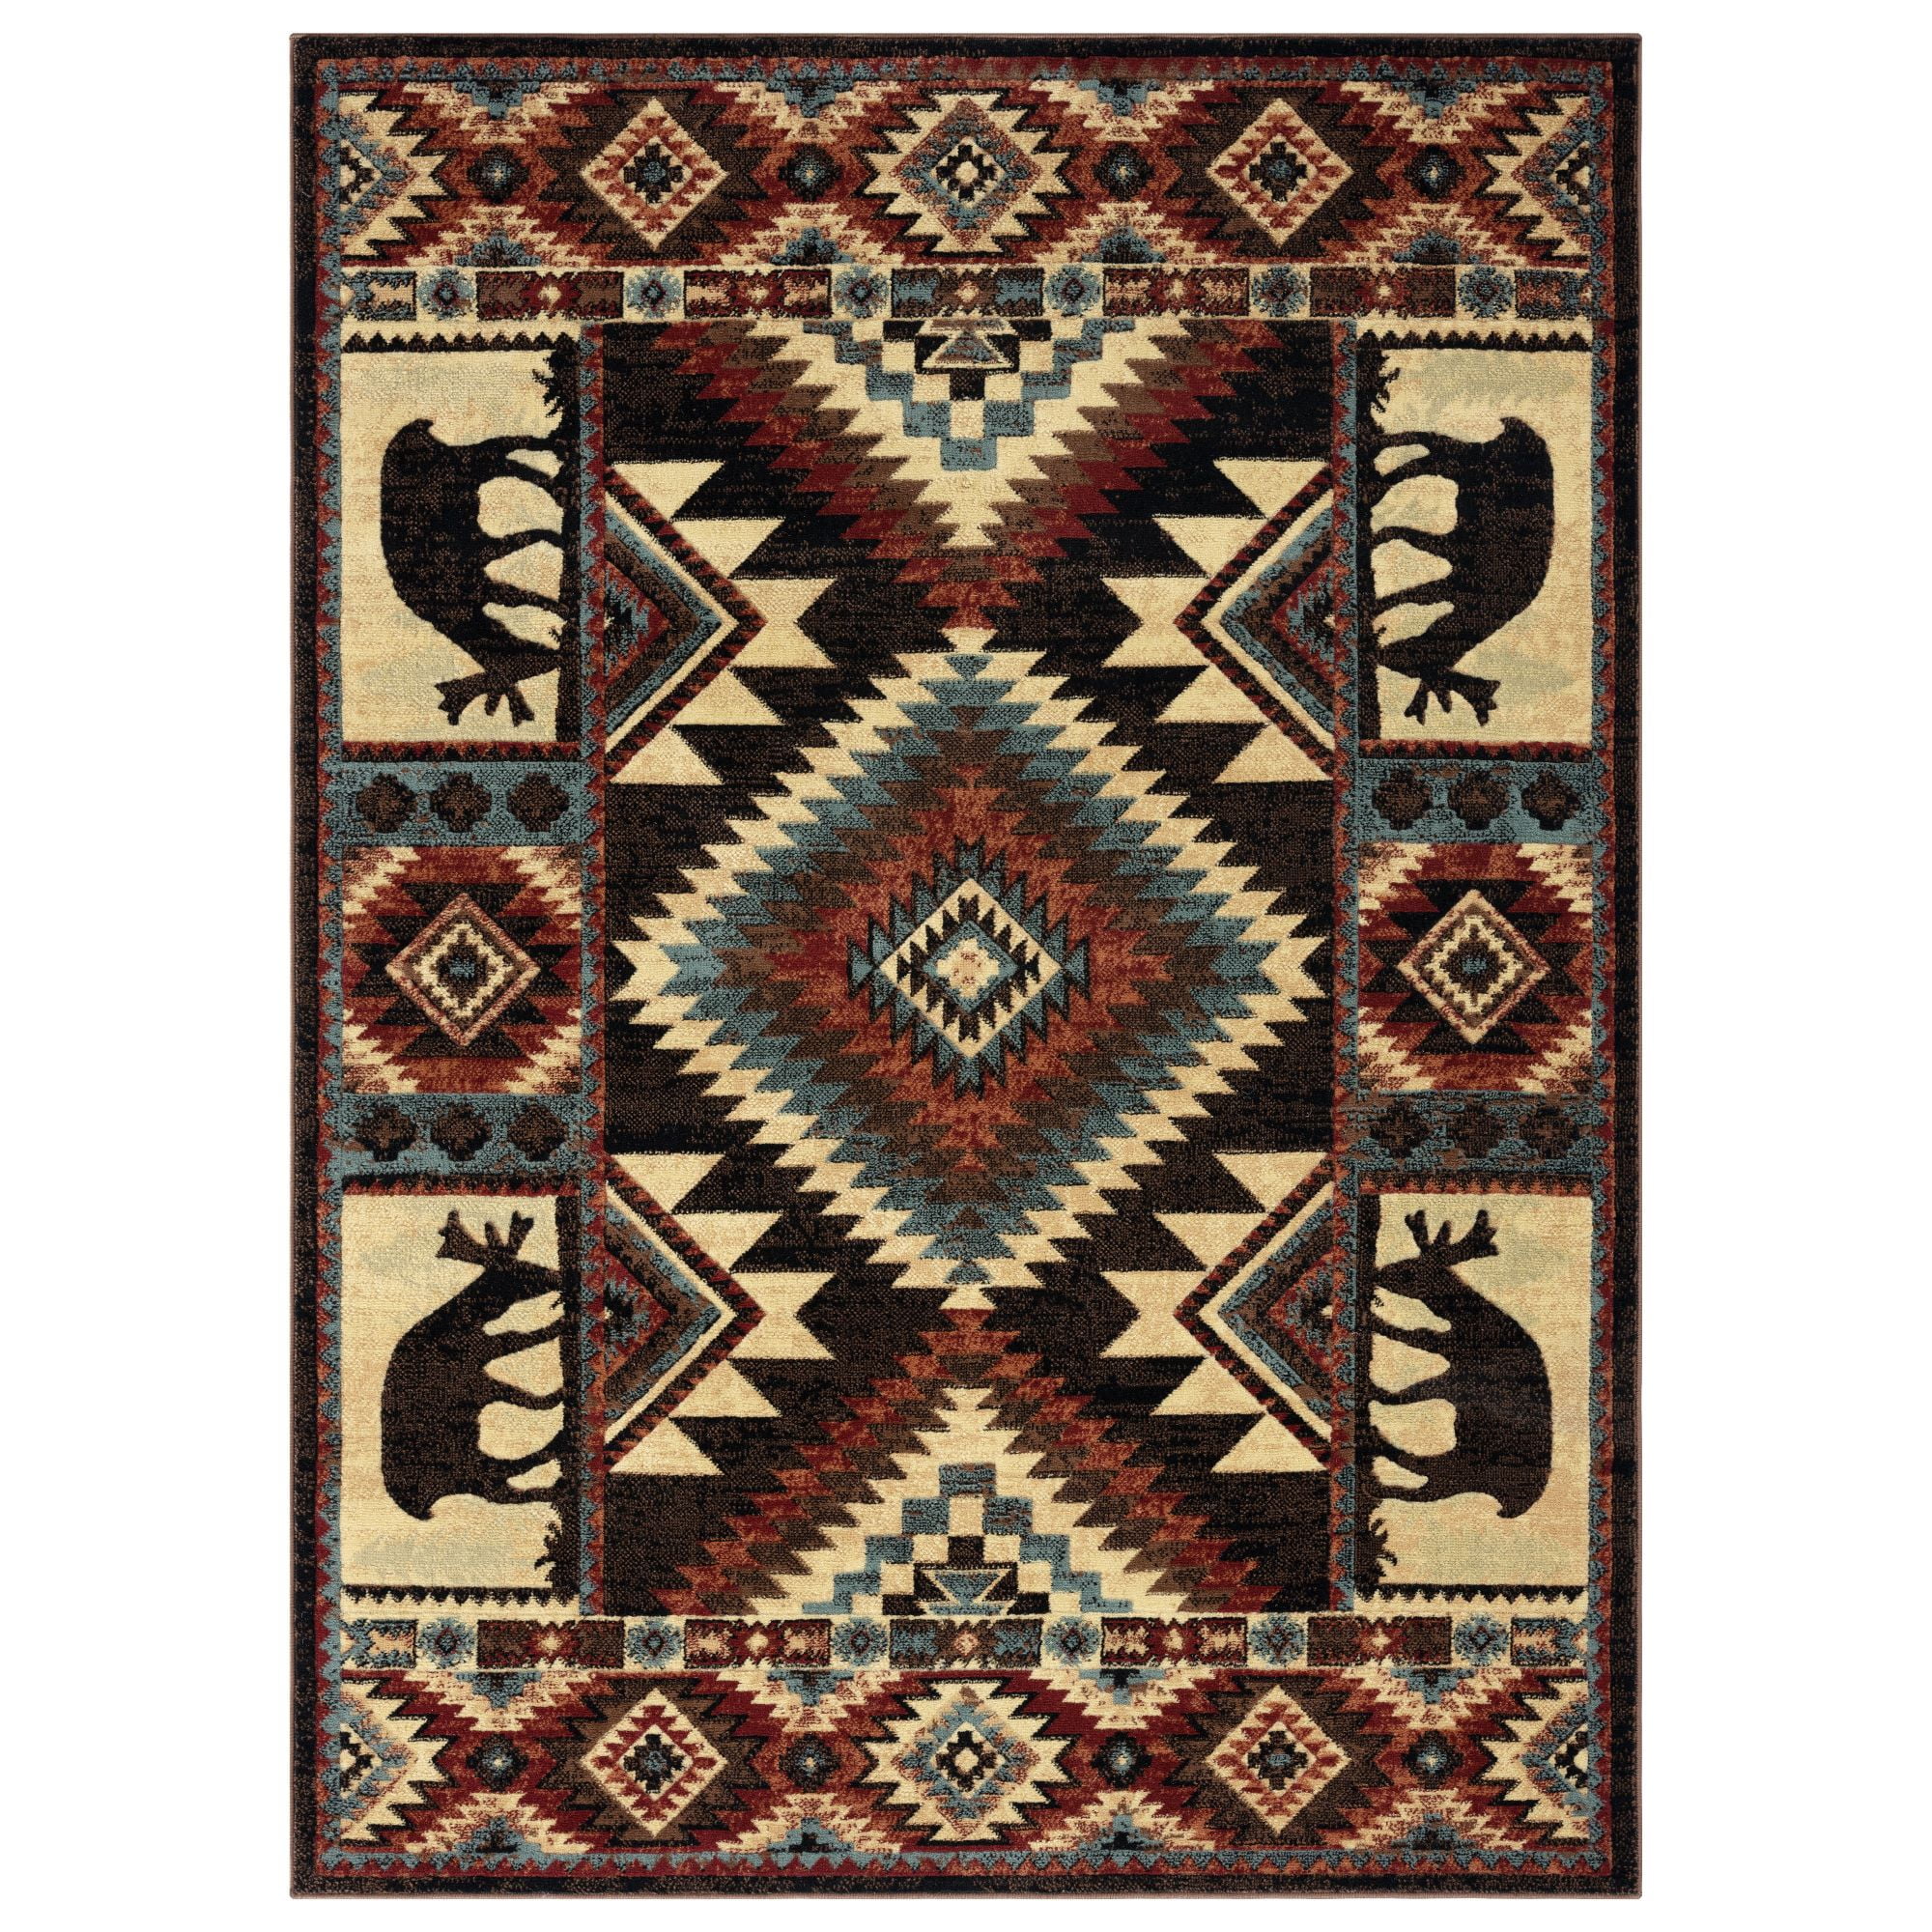 Western Texas Star Country Rustic Southwest Lodge Cabin Area Rugs Carpets 